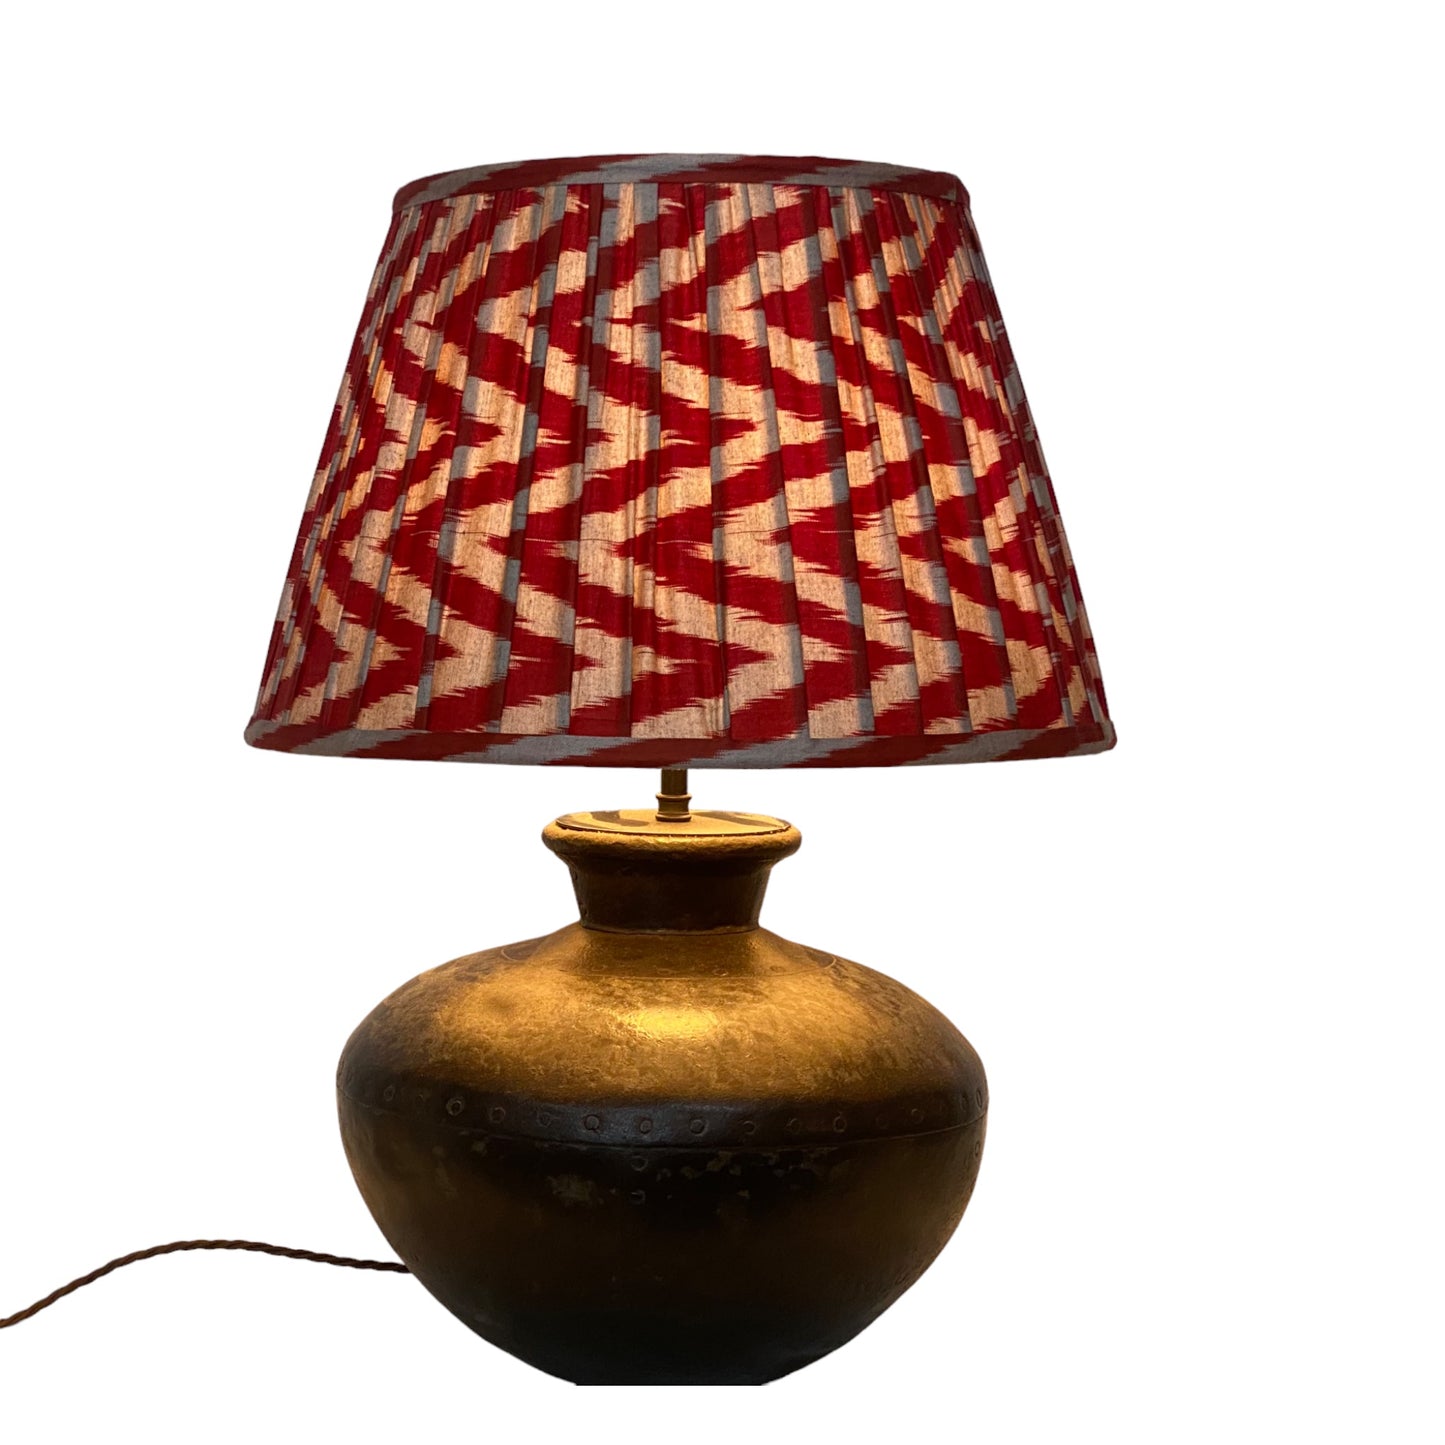 Red and grey ikat lampshade on Water carrier lamp base